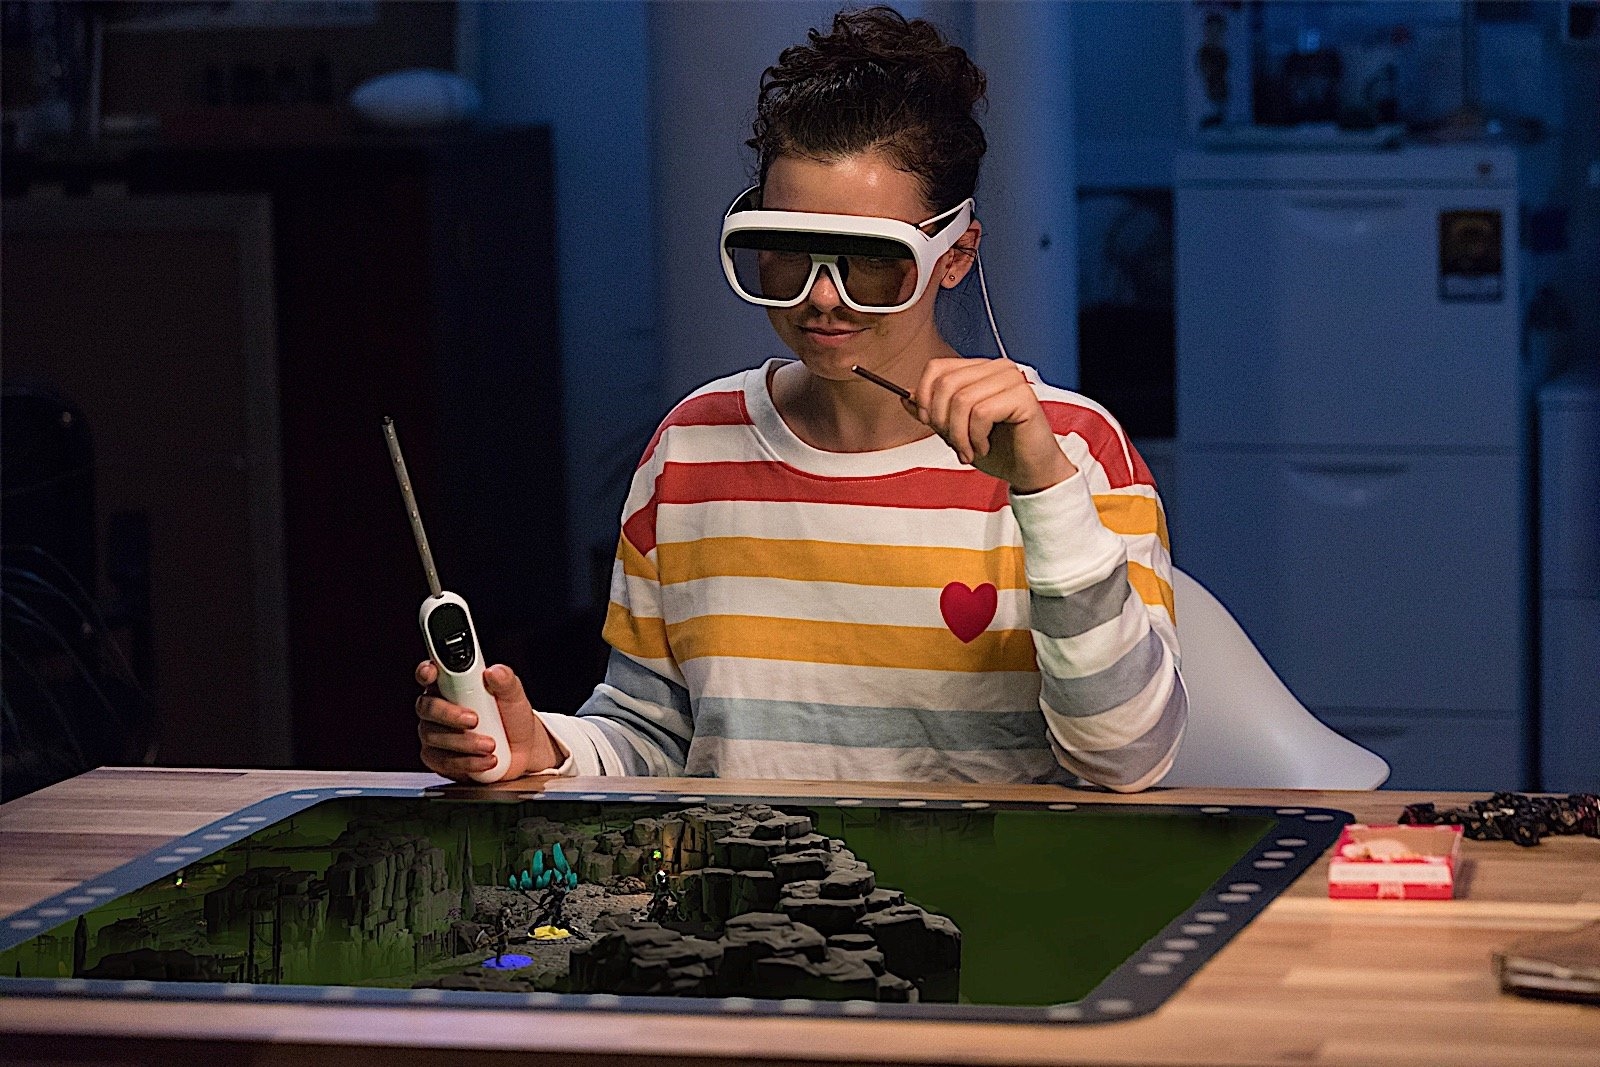 Tilt Five wants to bring augmented reality to tabletop games | DeviceDaily.com